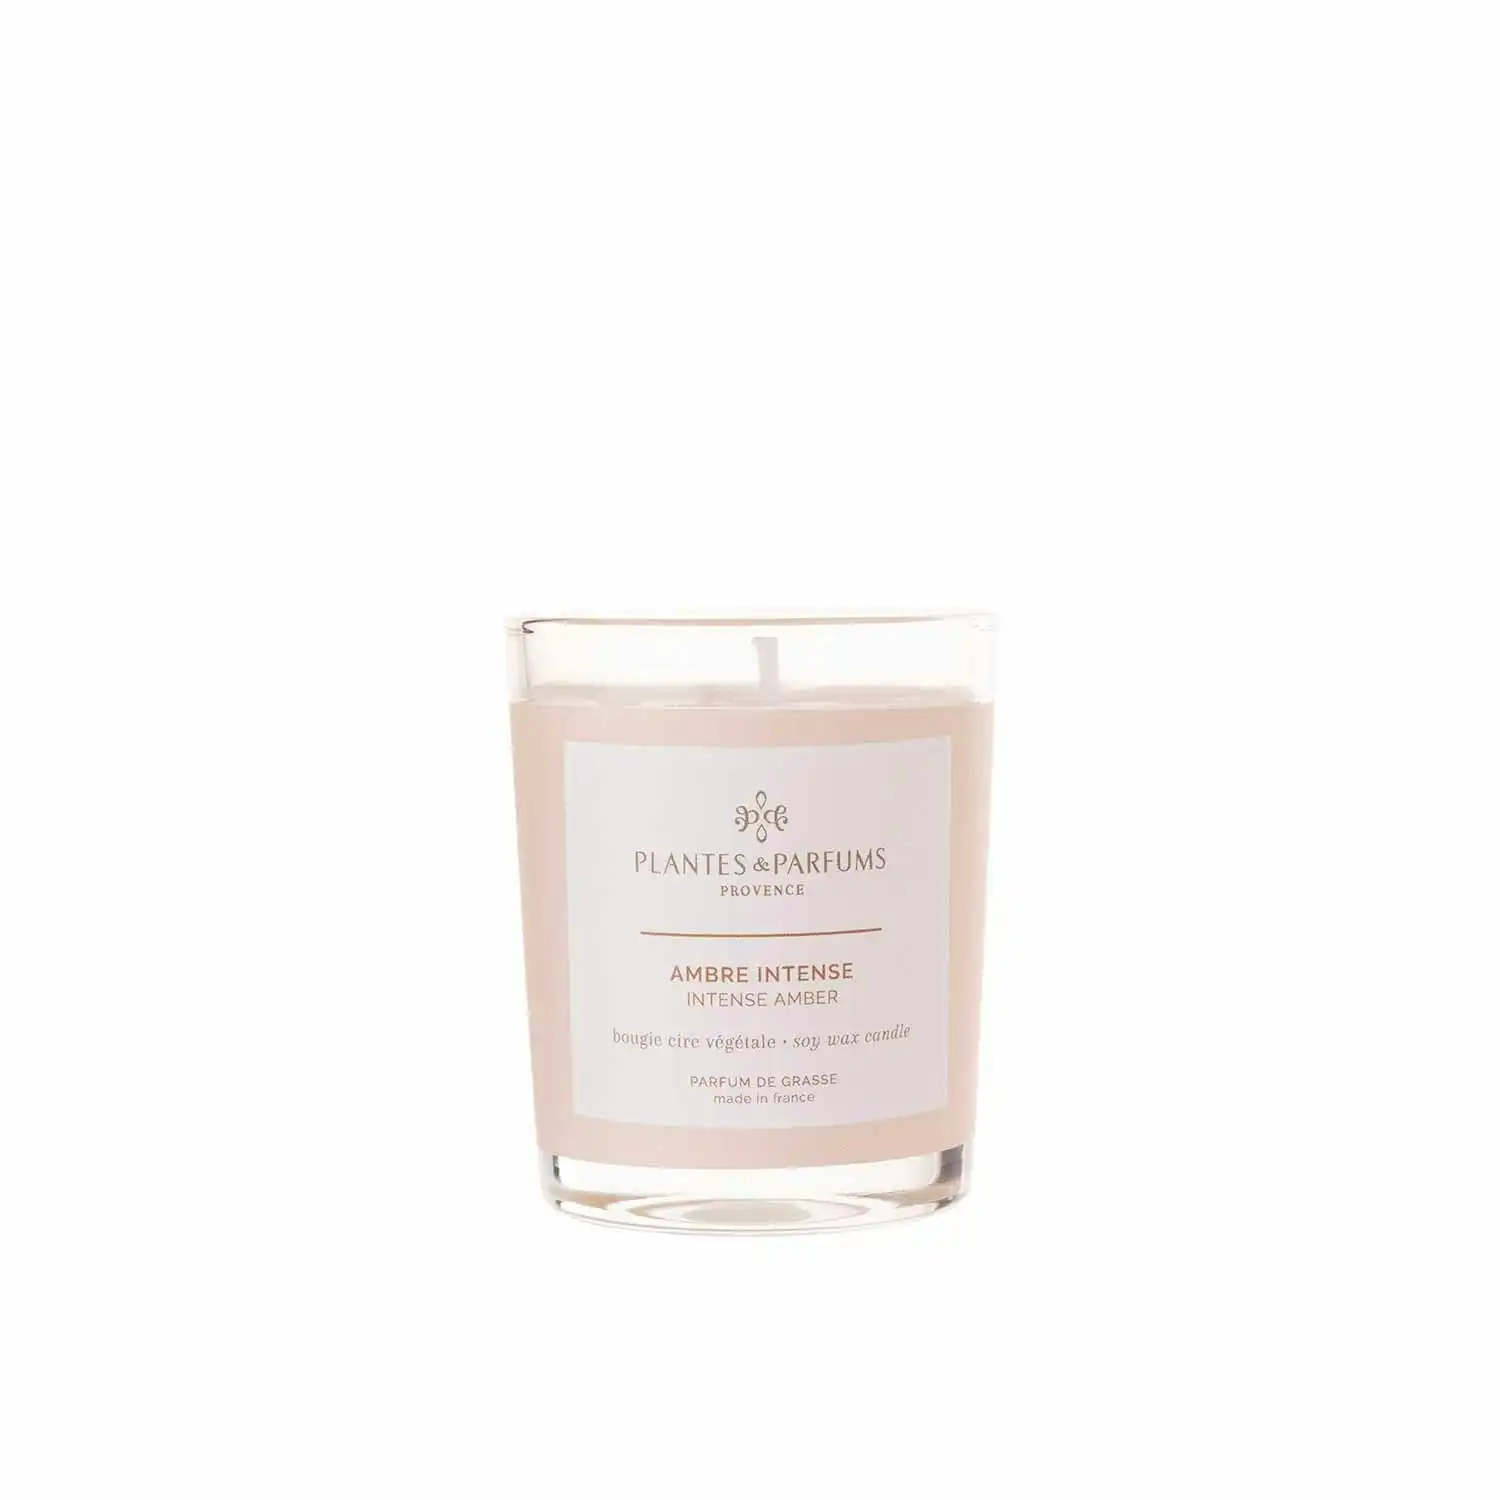 Plantes & Parfums | 75g Handcrafted Perfumed Candle - Intense Amber